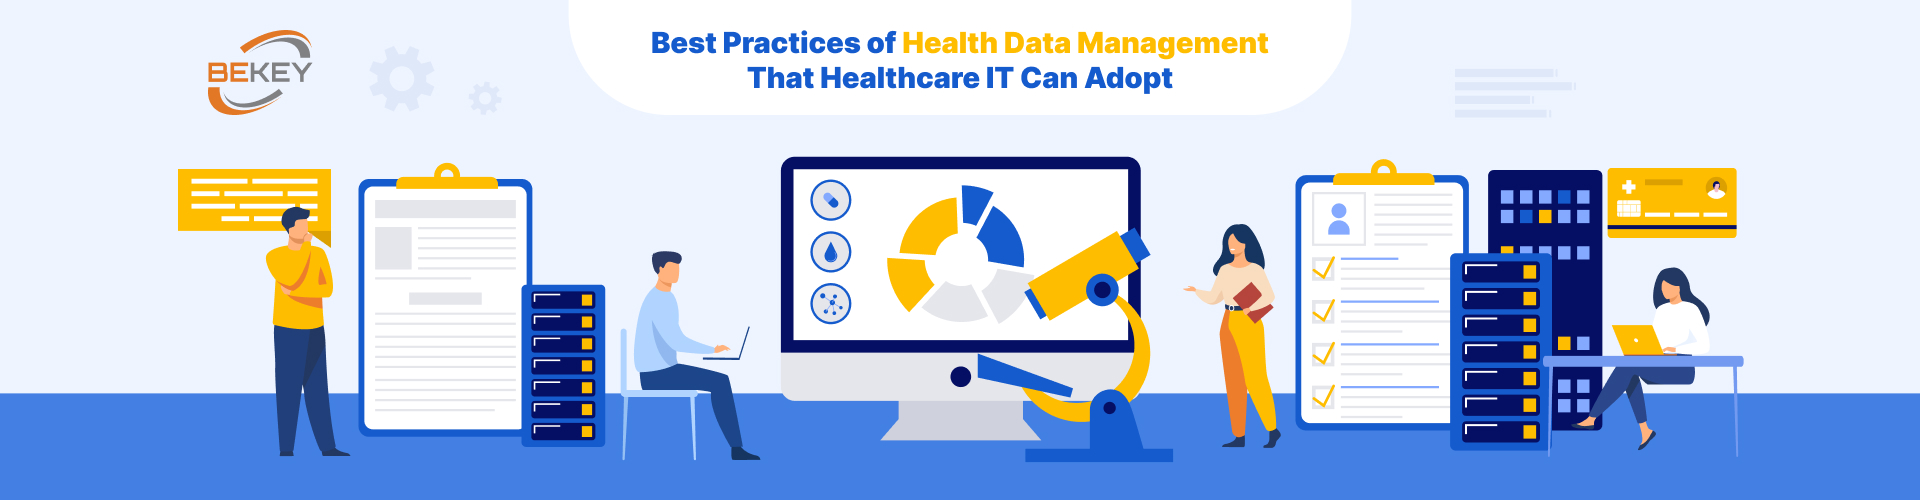 Best Practices of Health Data Management That Healthcare IT Can Adopt - image